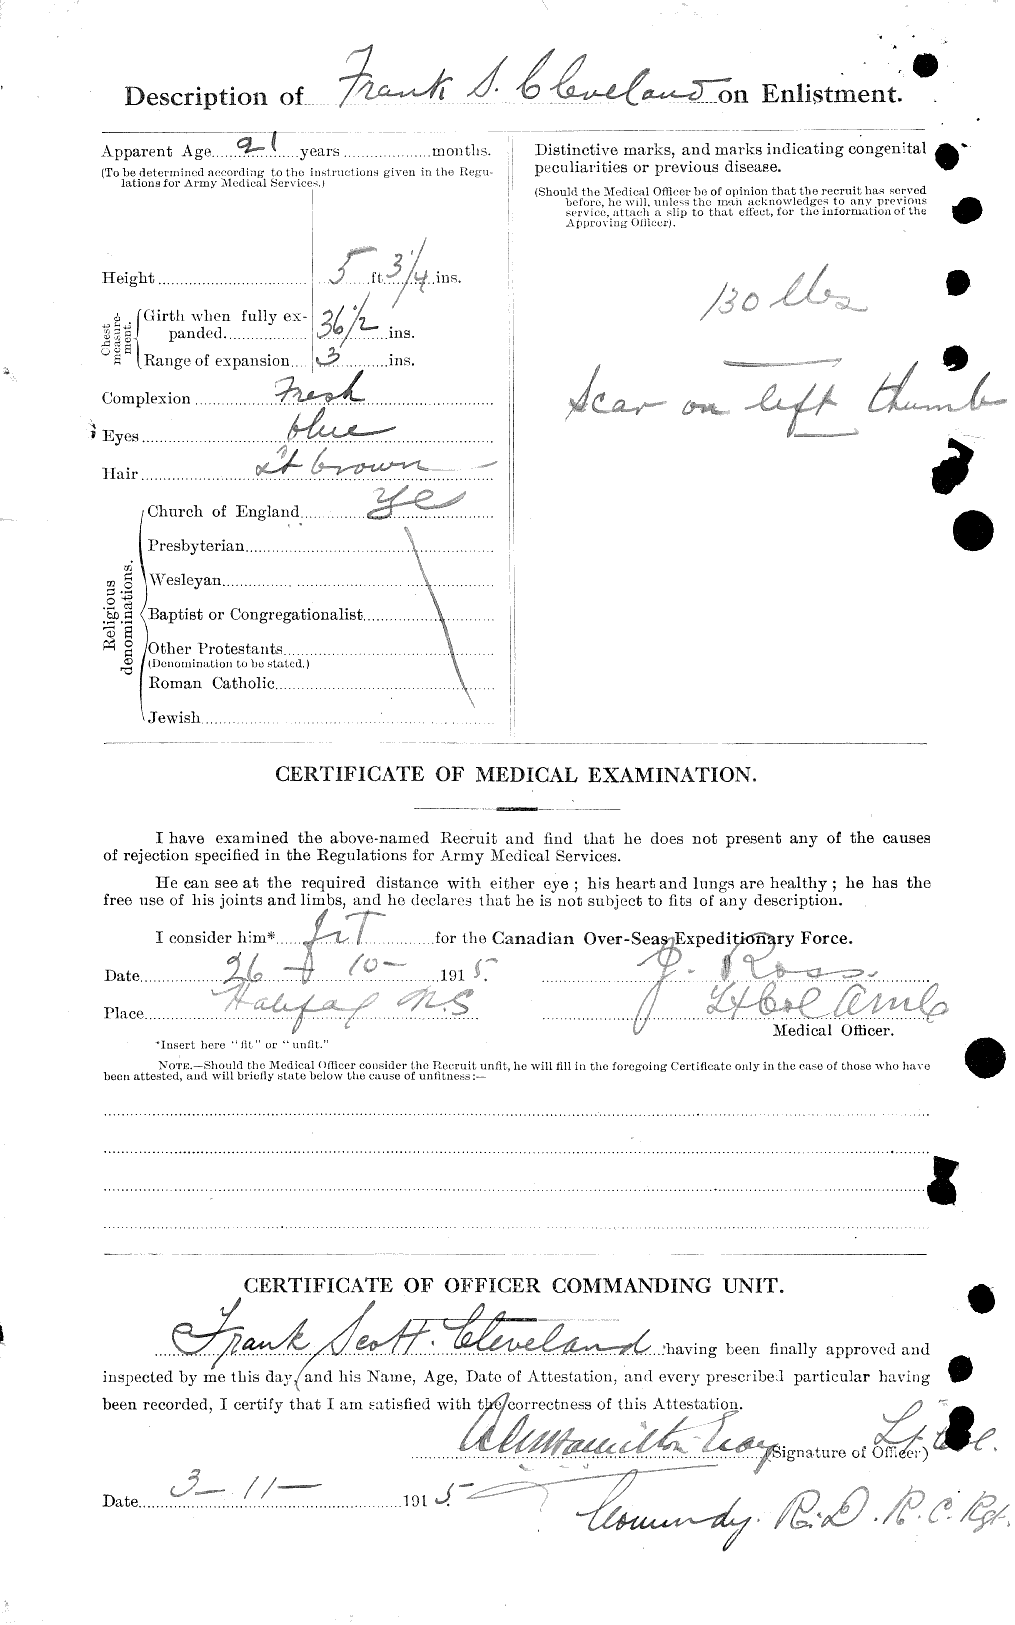 Personnel Records of the First World War - CEF 019480b